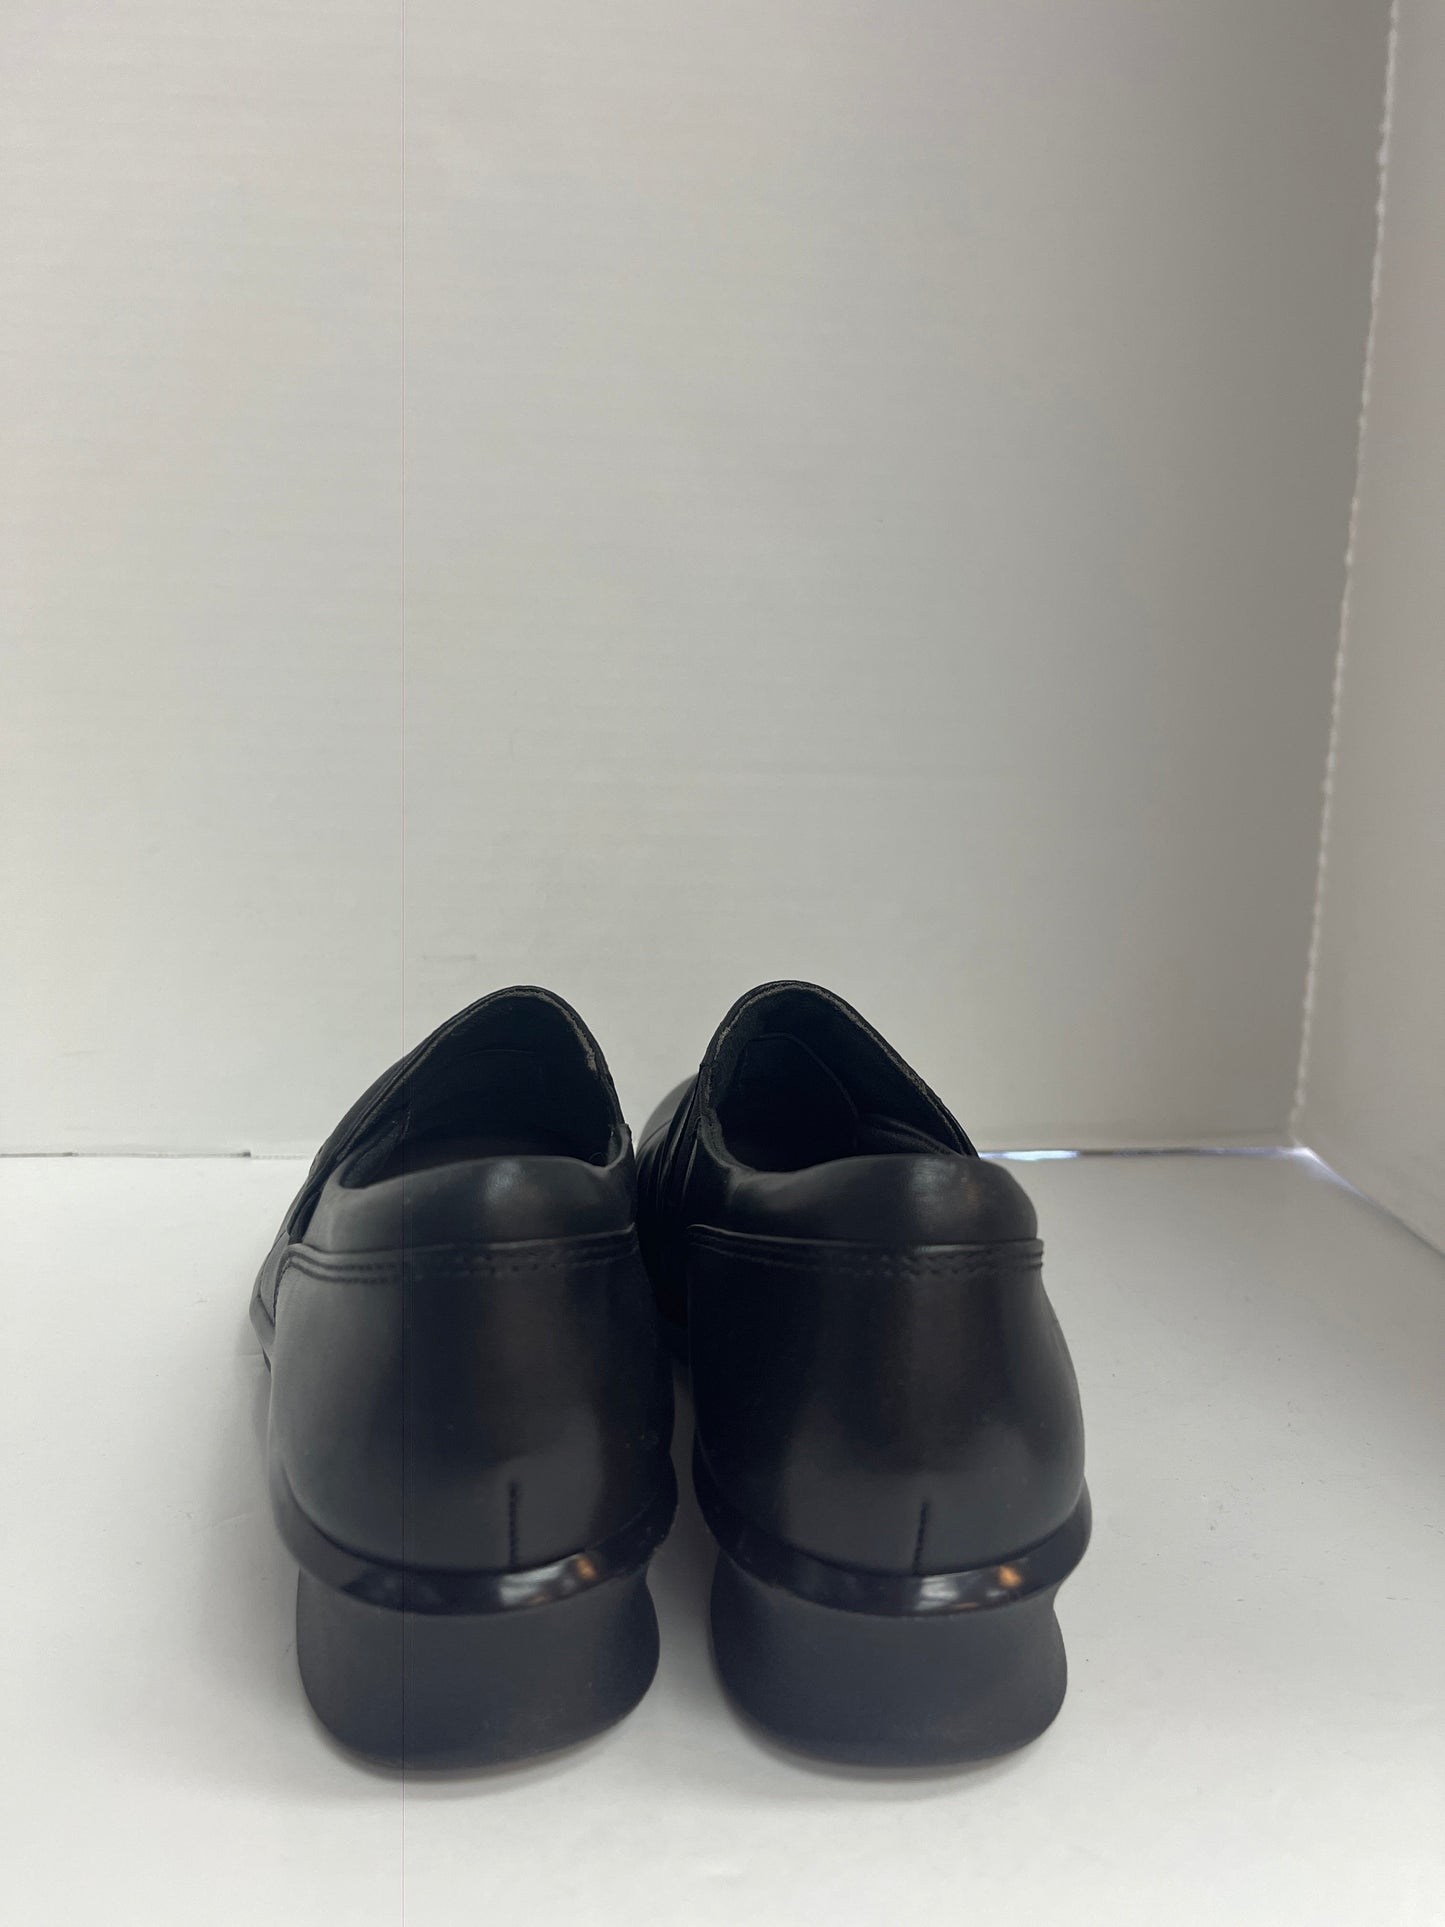 Shoes Flats Other By Clarks  Size: 6.5